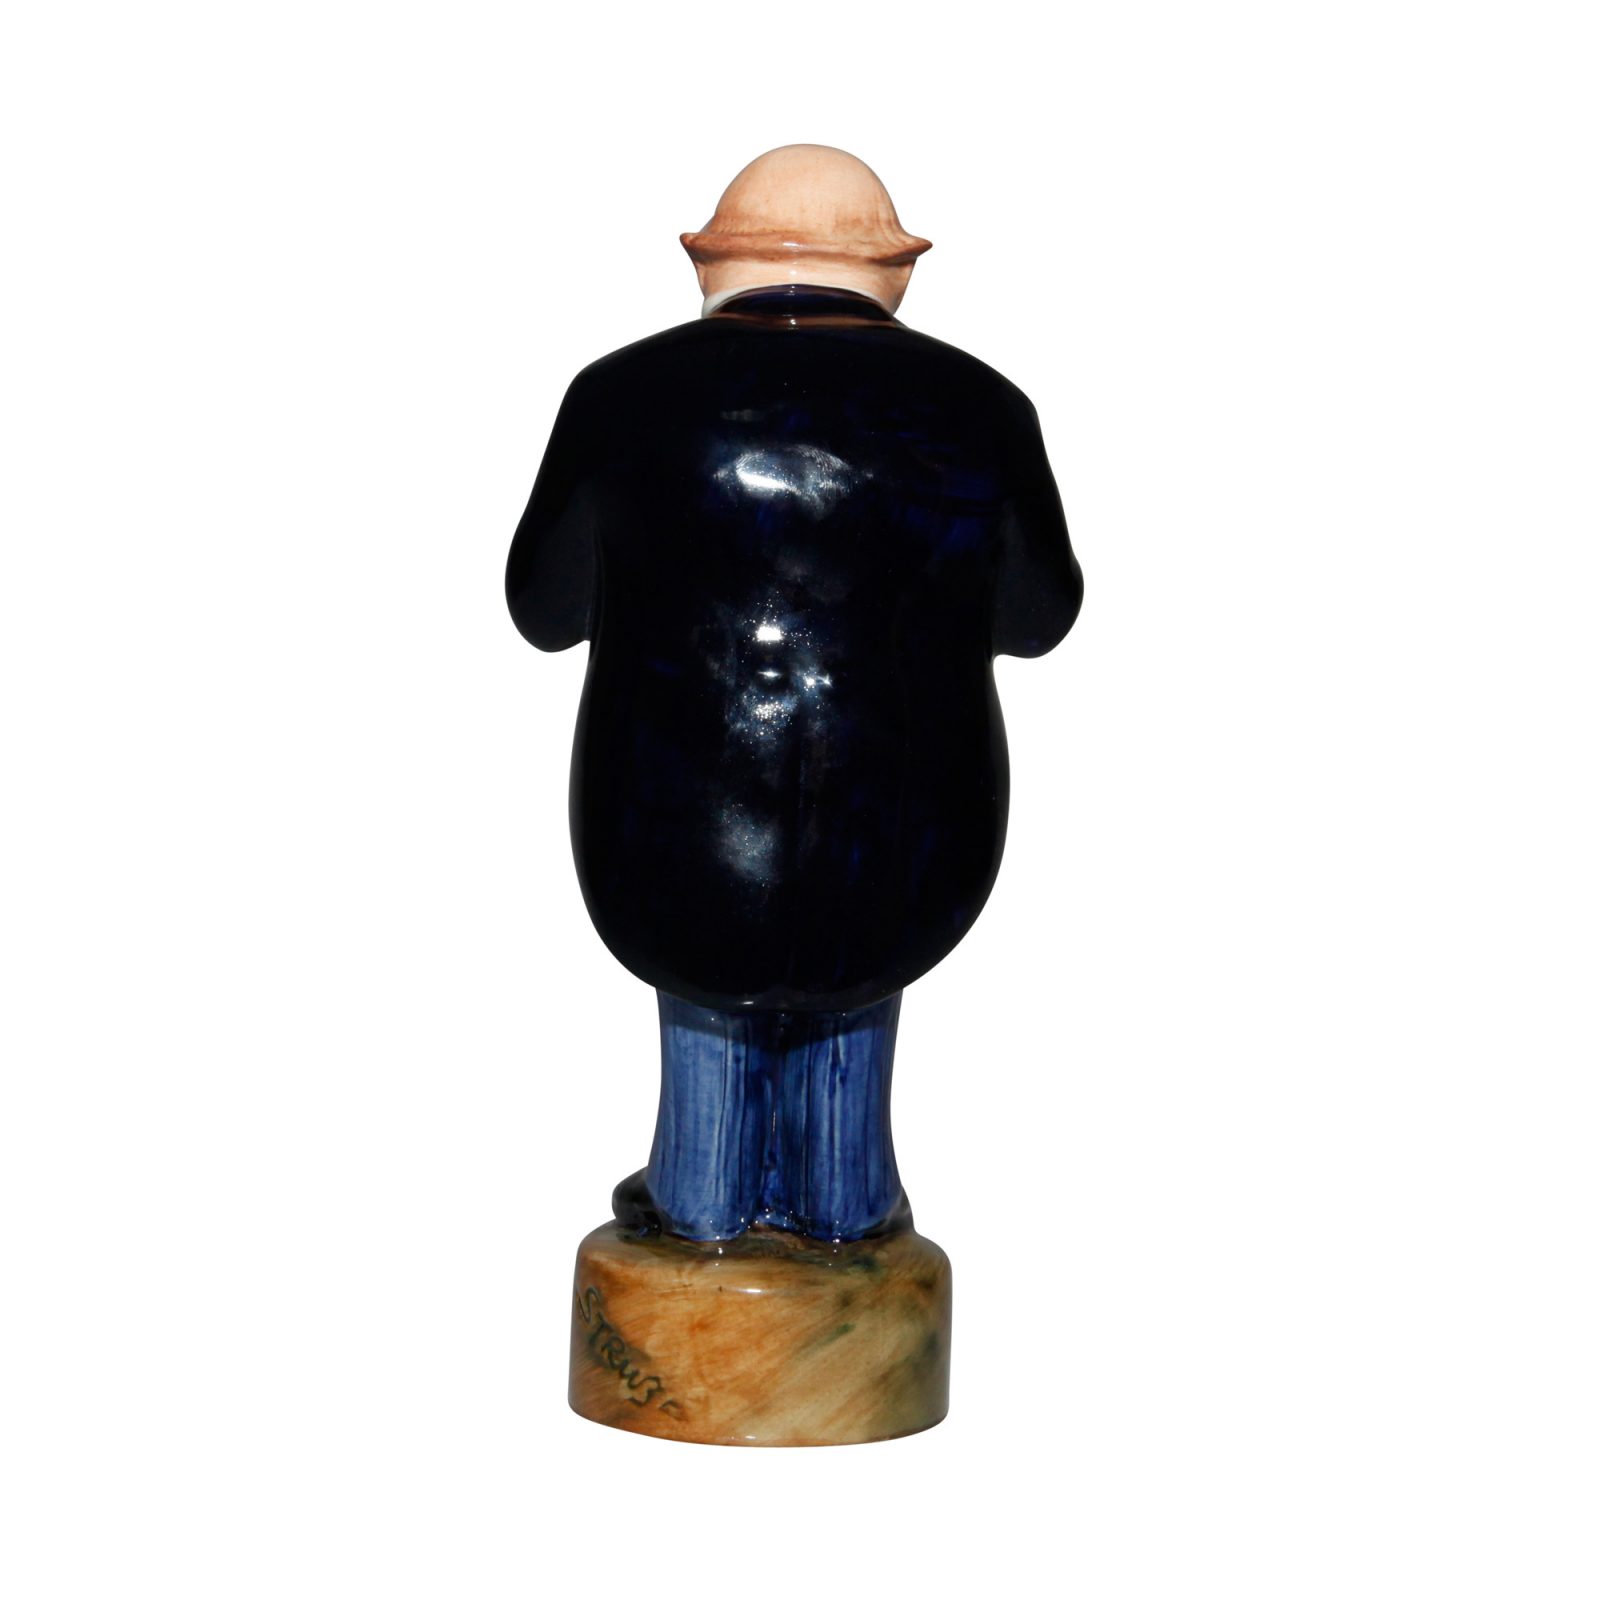 Winston Churchill George Strube - Dark Blue Jacket, blue pants - Bairstow Manor Collectables